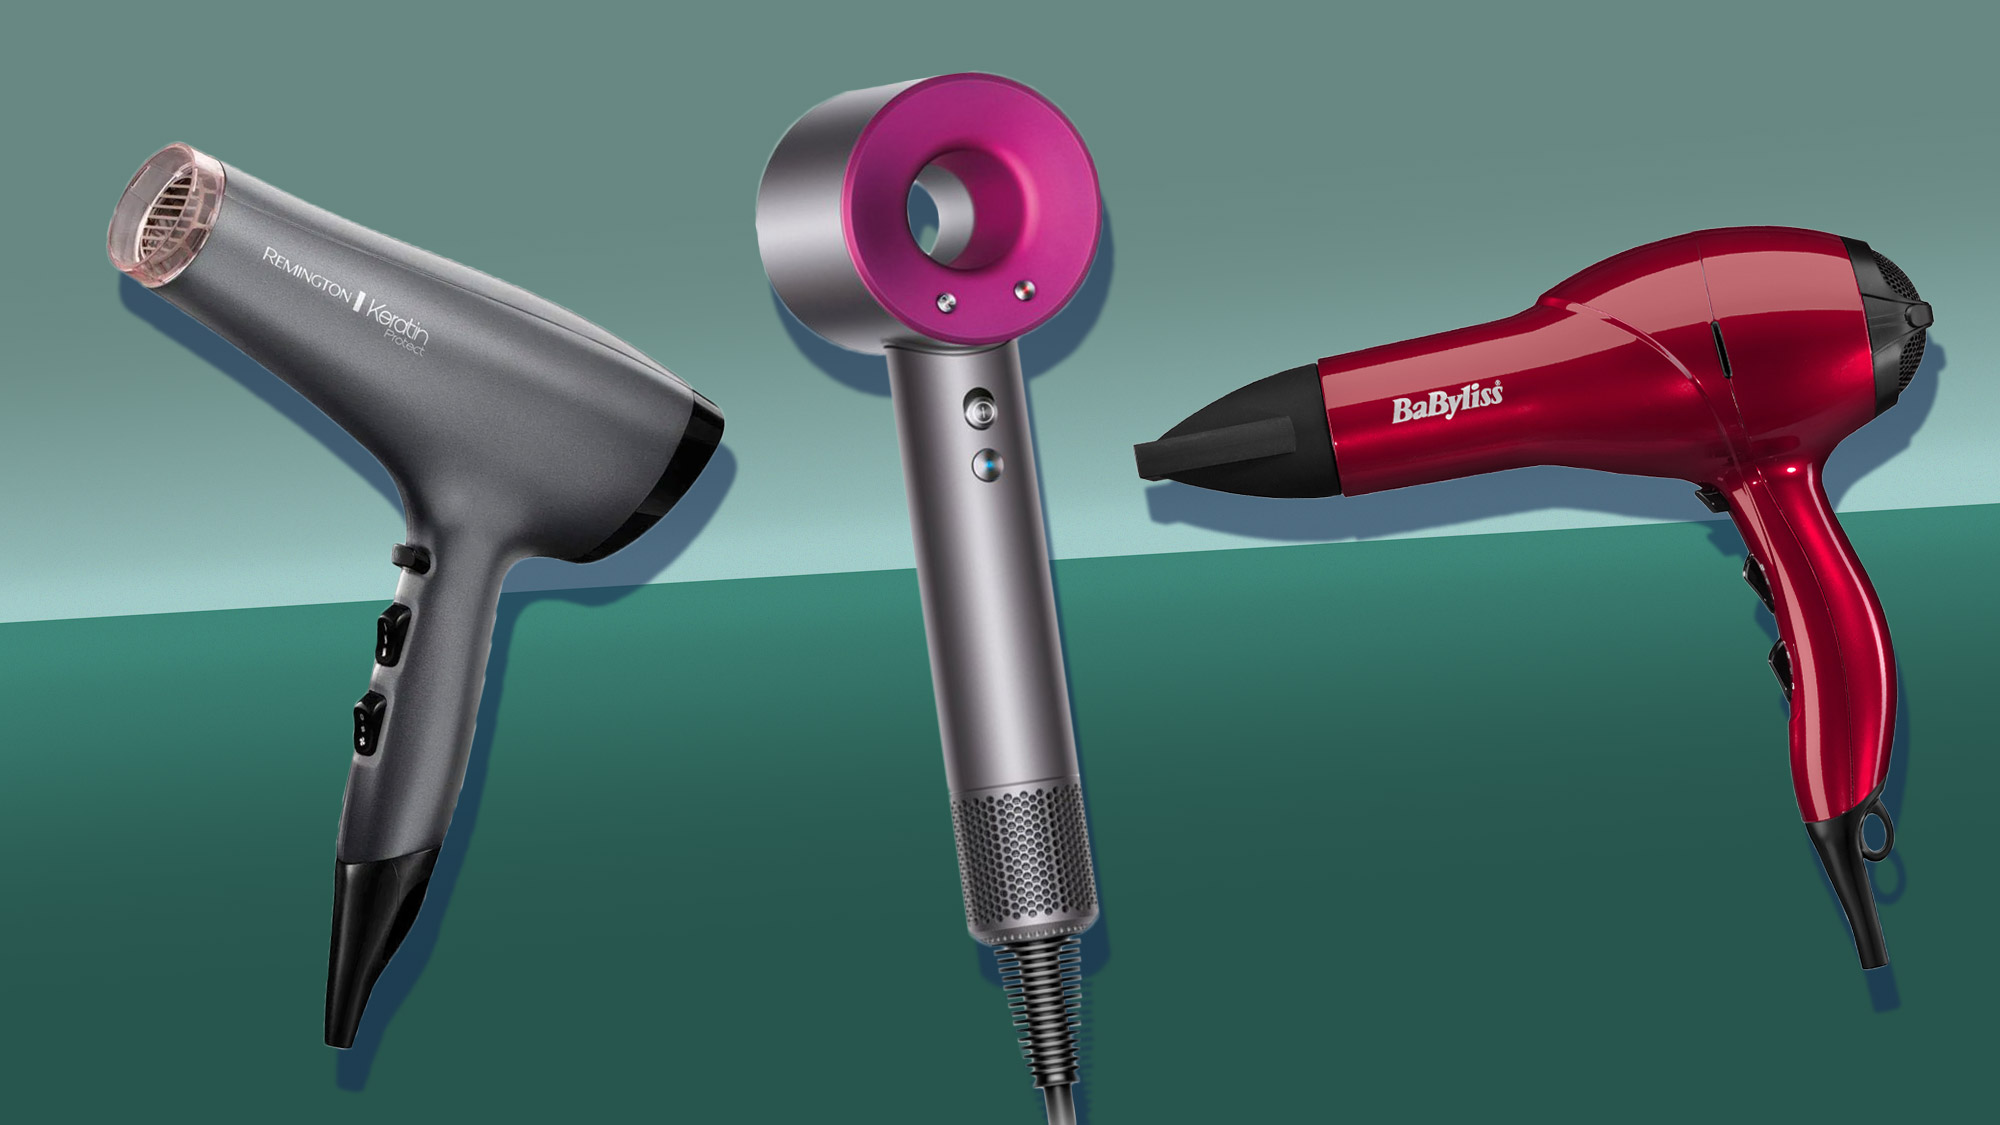 What is the most powerful hair dryer on the market Best Hair Dryer Top Hair Dryers For Smooth And Shiny Styles Techradar